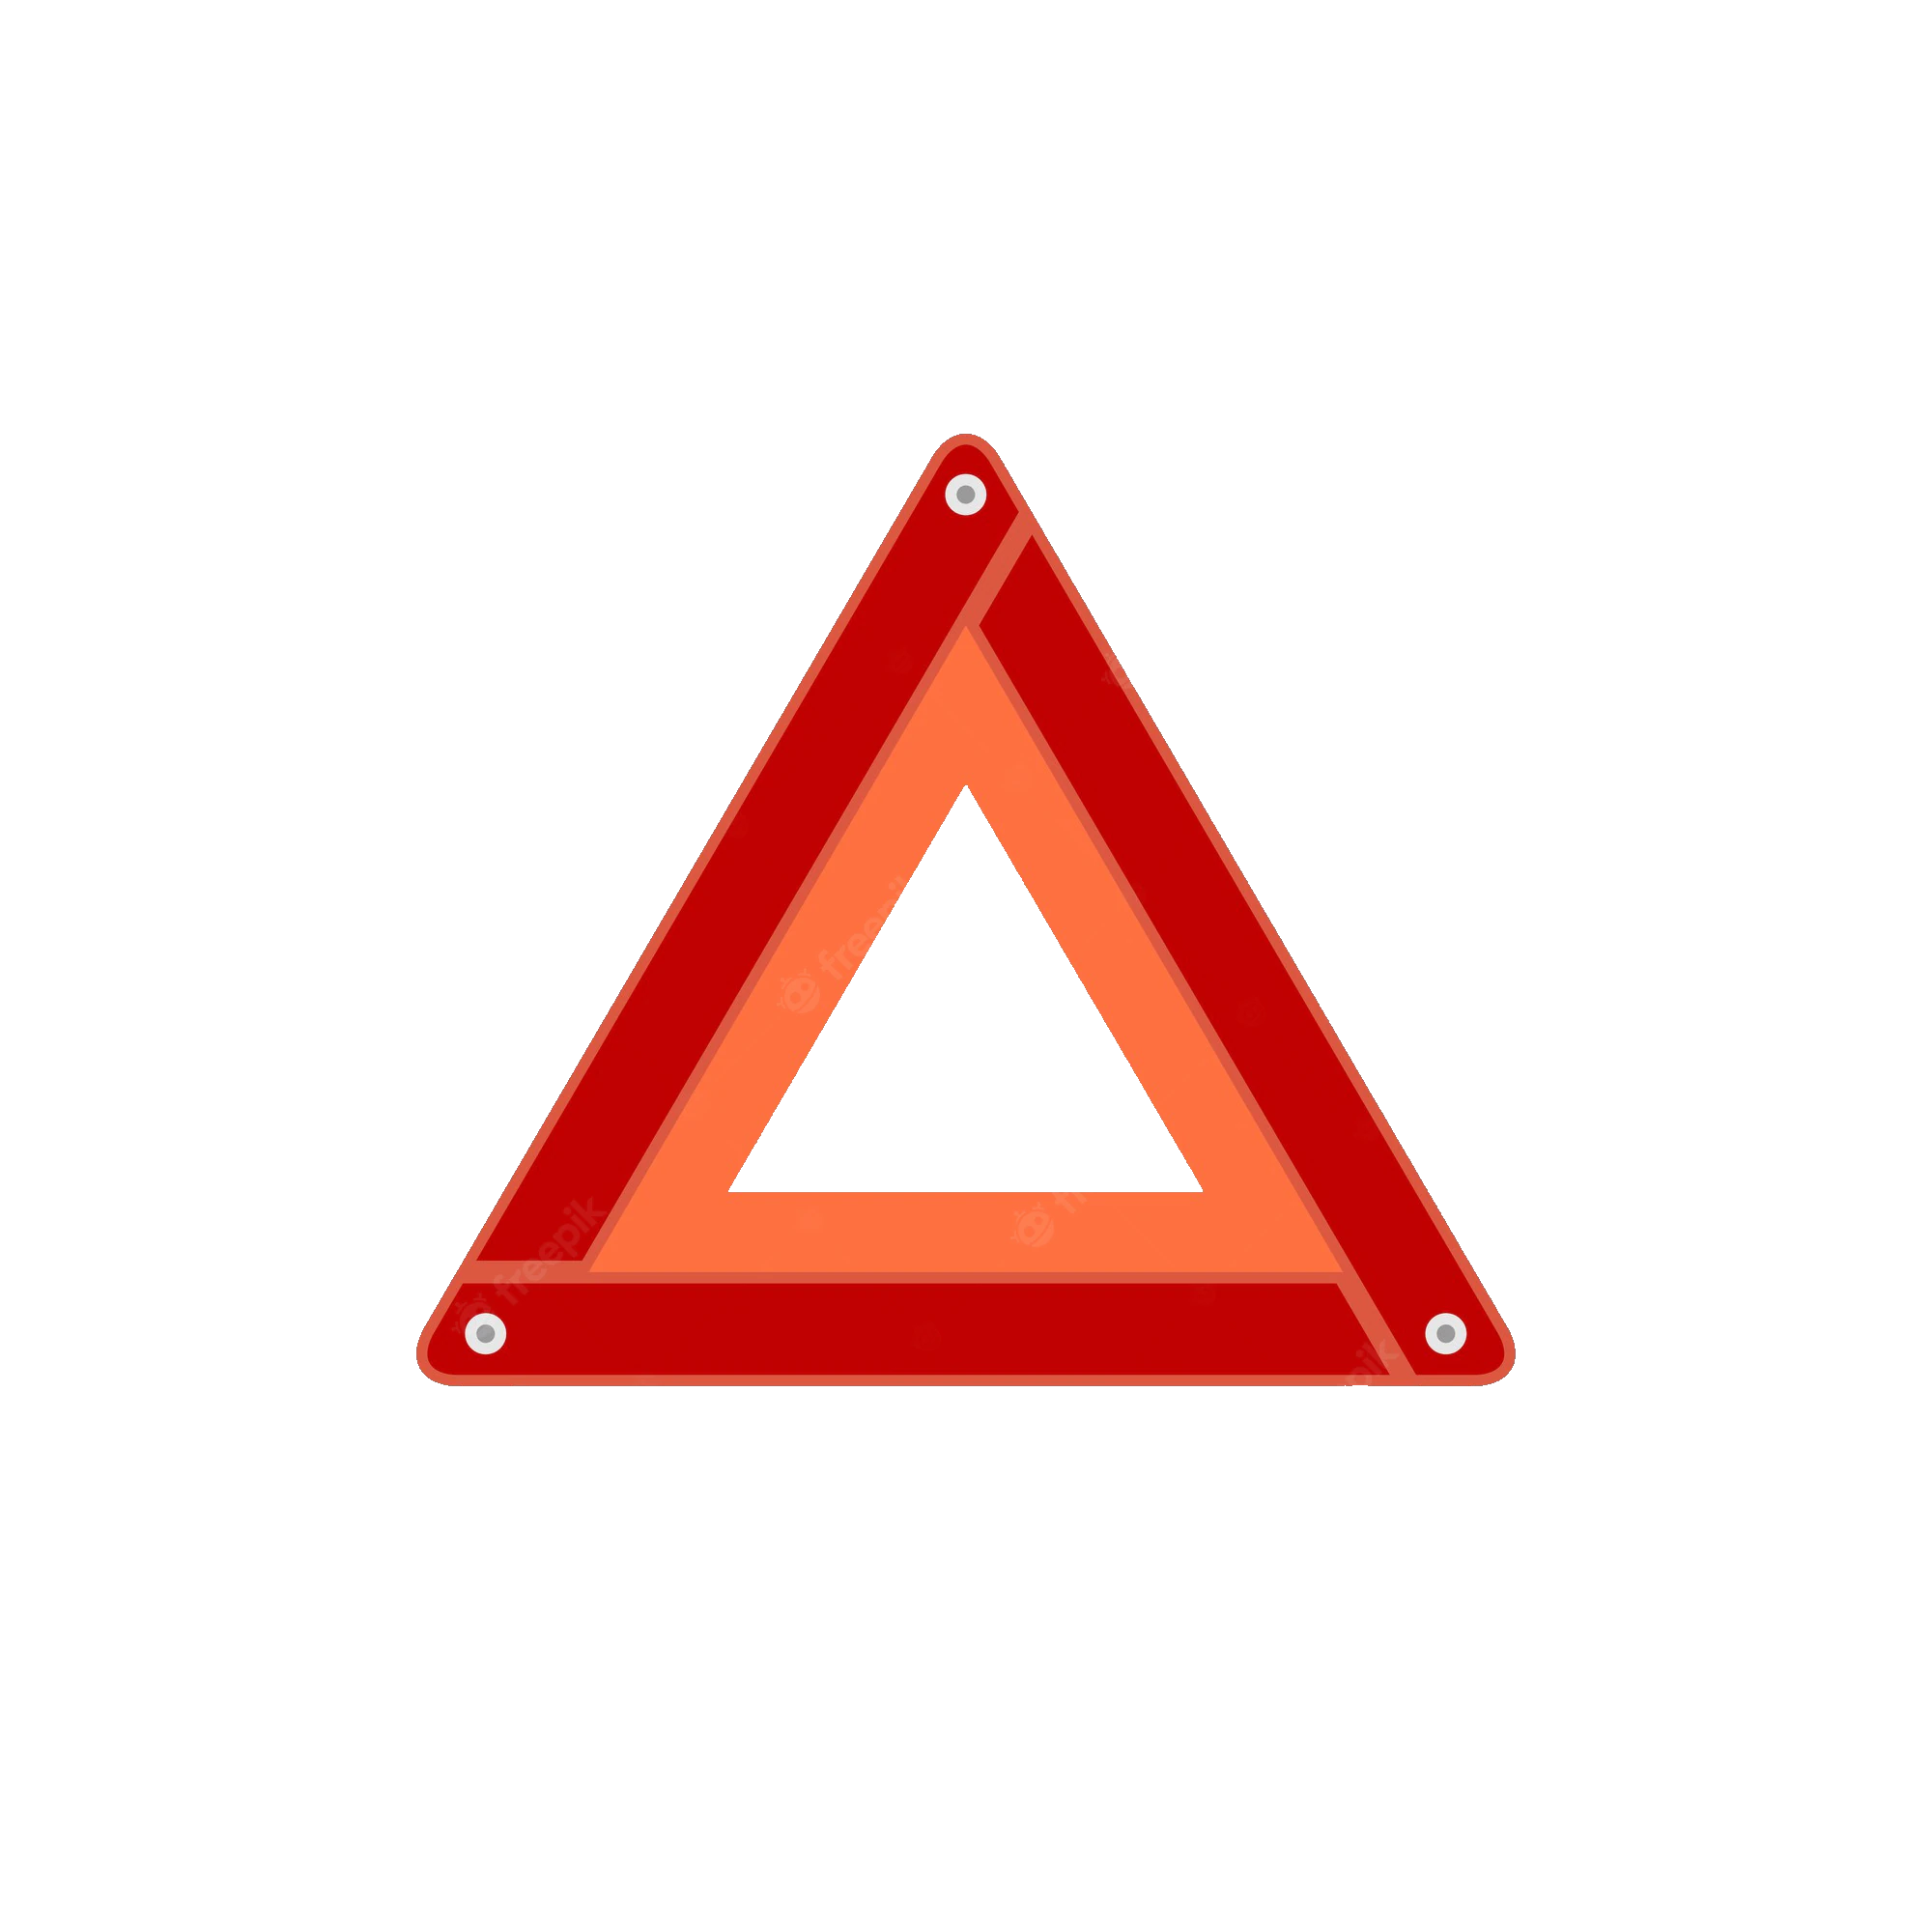 Safety Equipment Warning Triangle